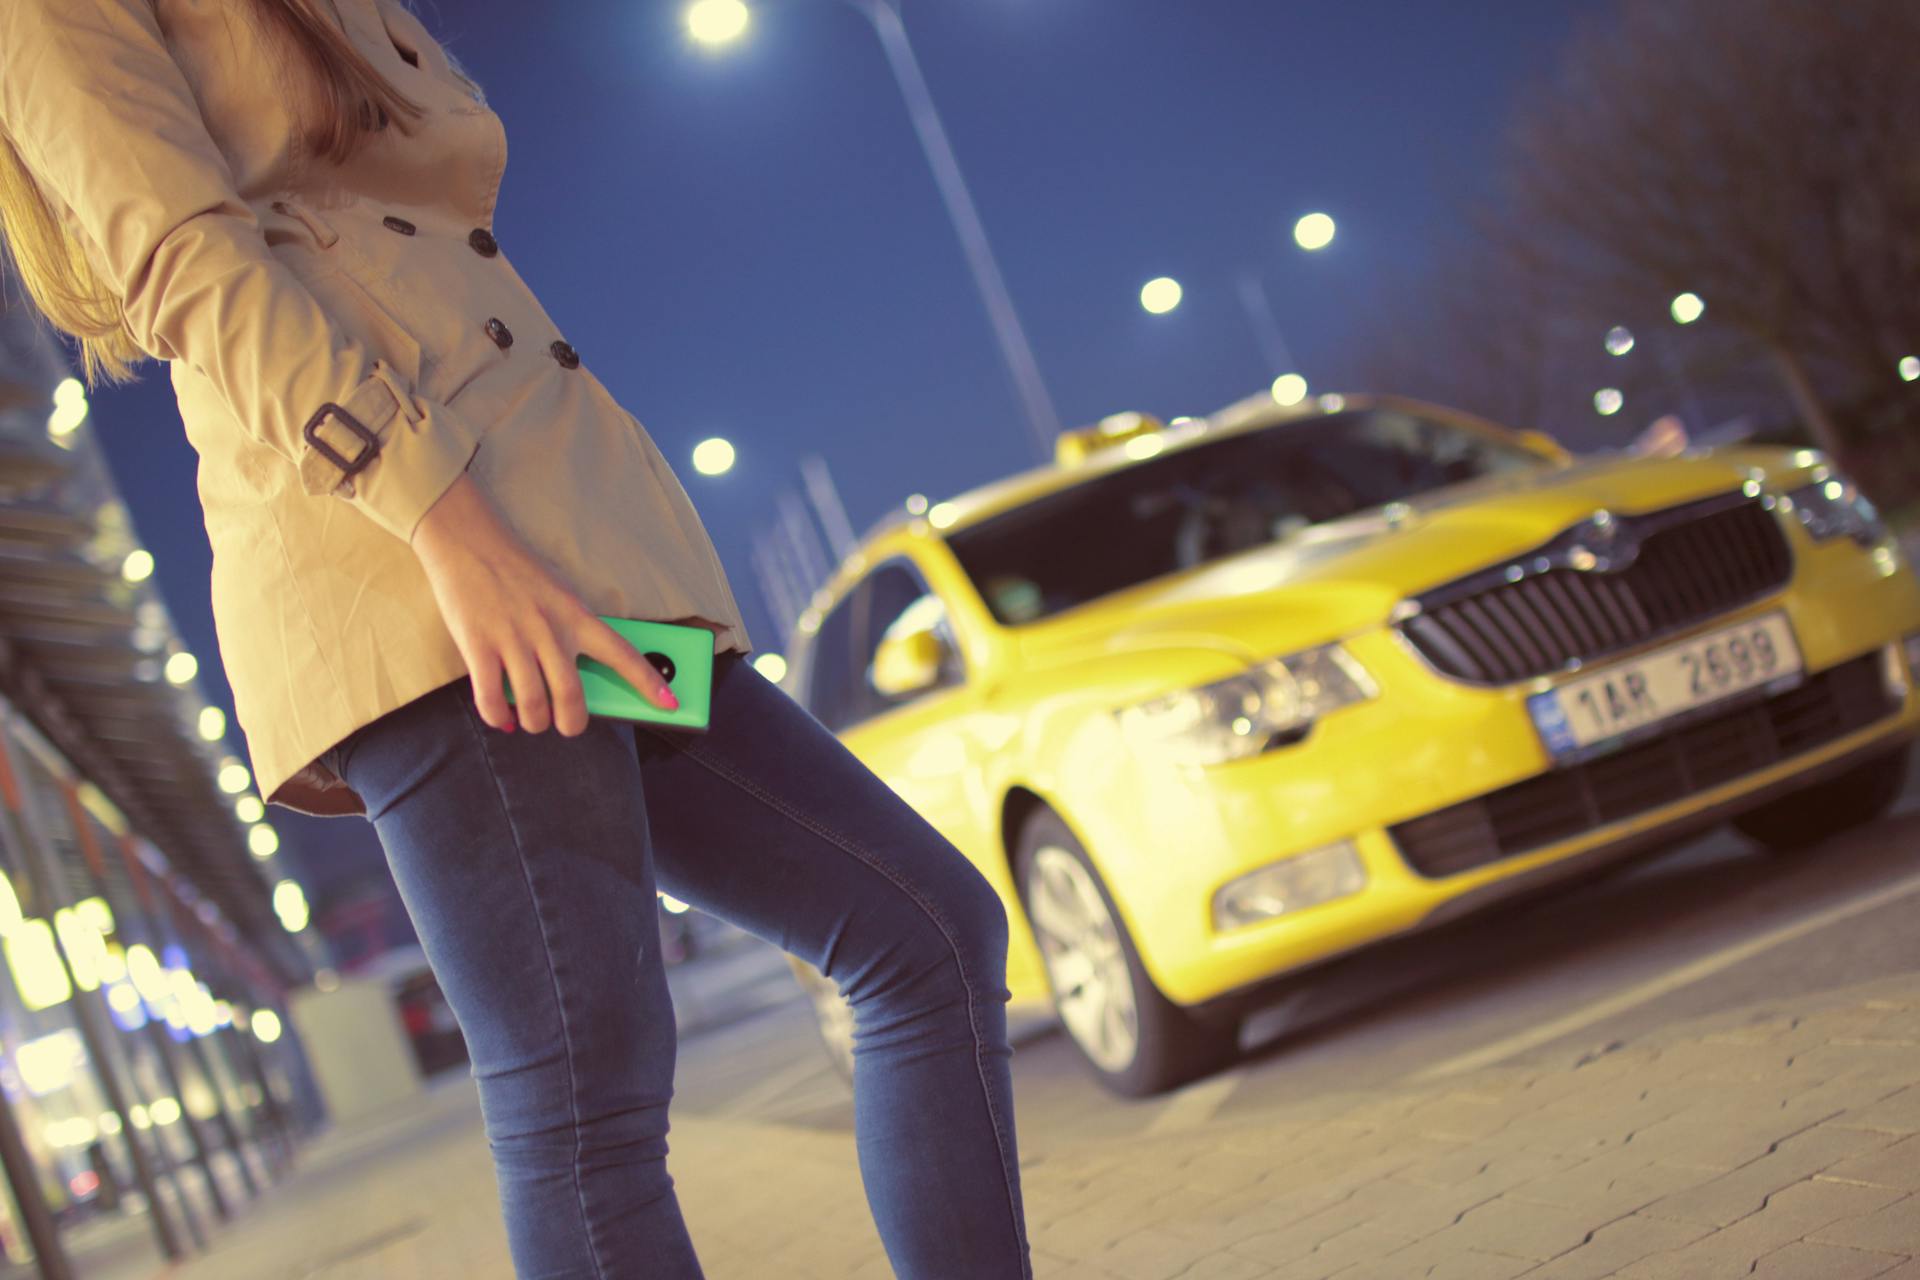 A woman waiting for a taxi | Source: Pexels